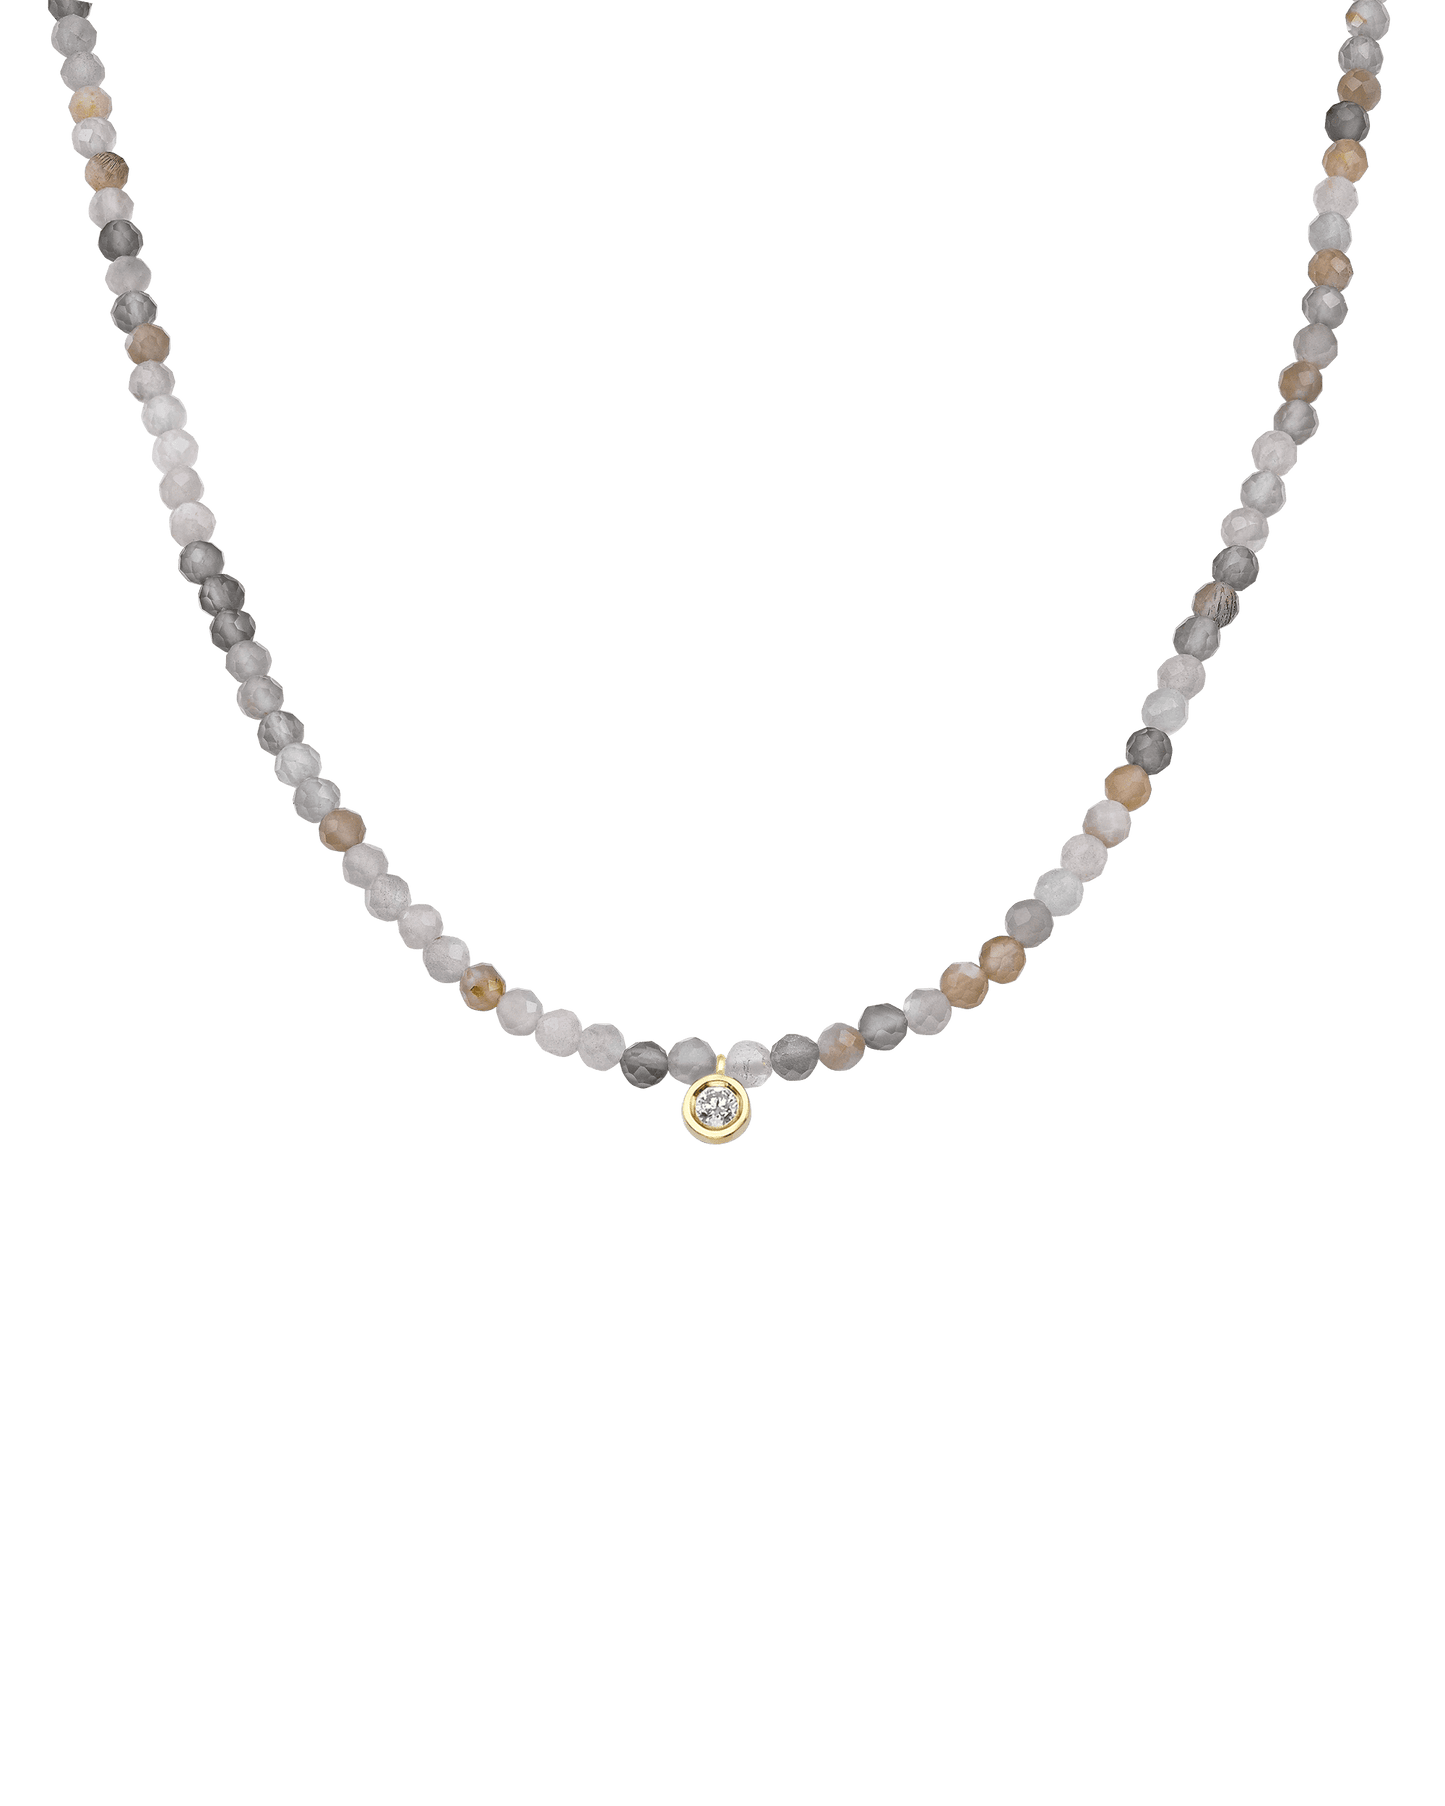 The Gemstone & Diamond Necklace - 14K Yellow Gold Necklaces 14K Solid Gold Natural Moonstone Medium: 0.04ct 14"